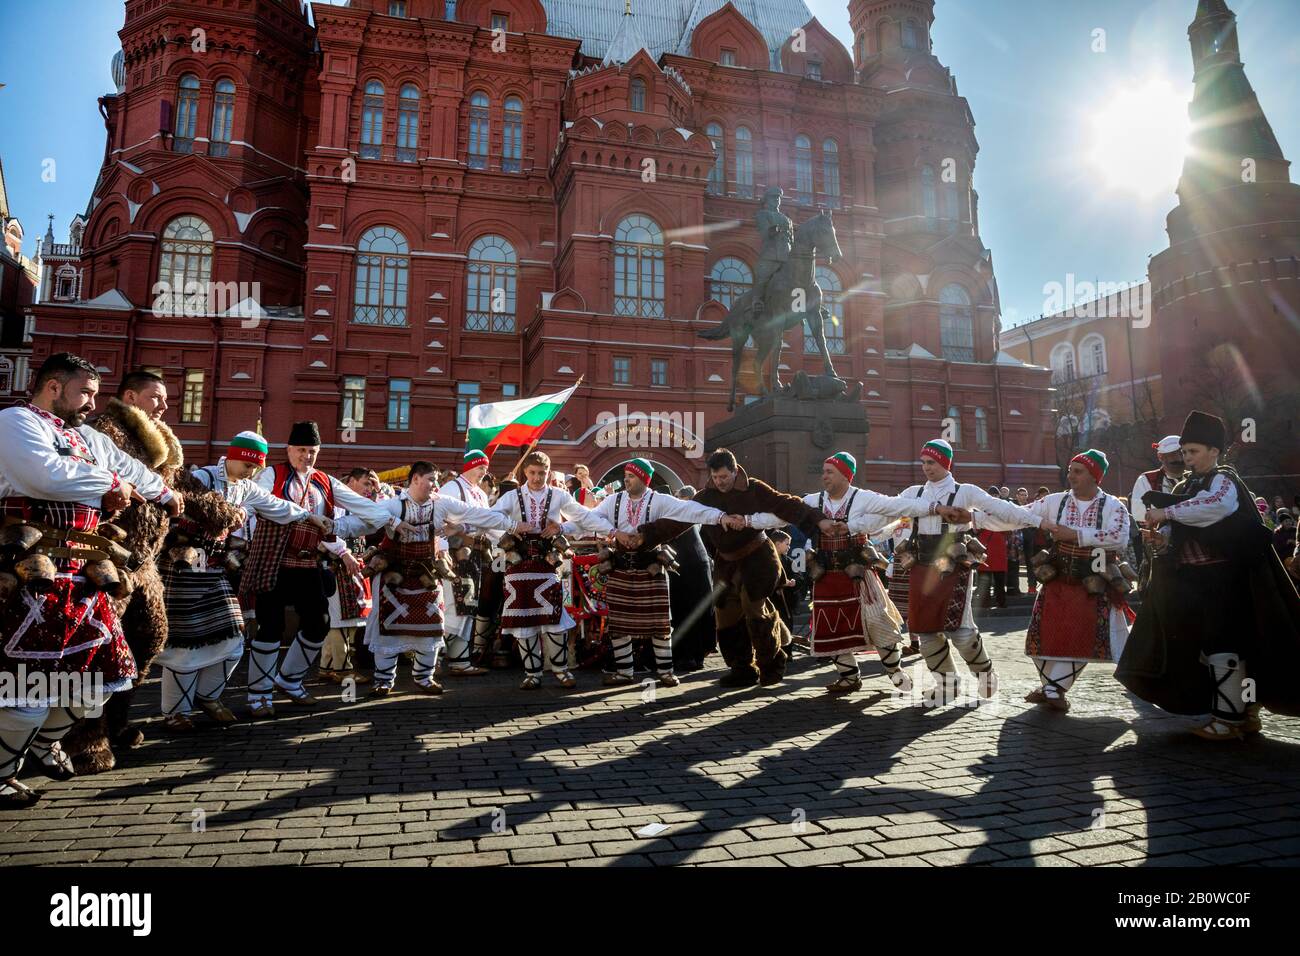 Moscow, Russia. 21st of February, 2020 People in ethnic costumes from Bulgarian village Aydemir dancing during the 2020 Moscow Maslenitsa Festival (Pancake Week) that celebrates the end of winter and marks the arrival of spring, in Manezhnaya Square in central Moscow, Russia Stock Photo